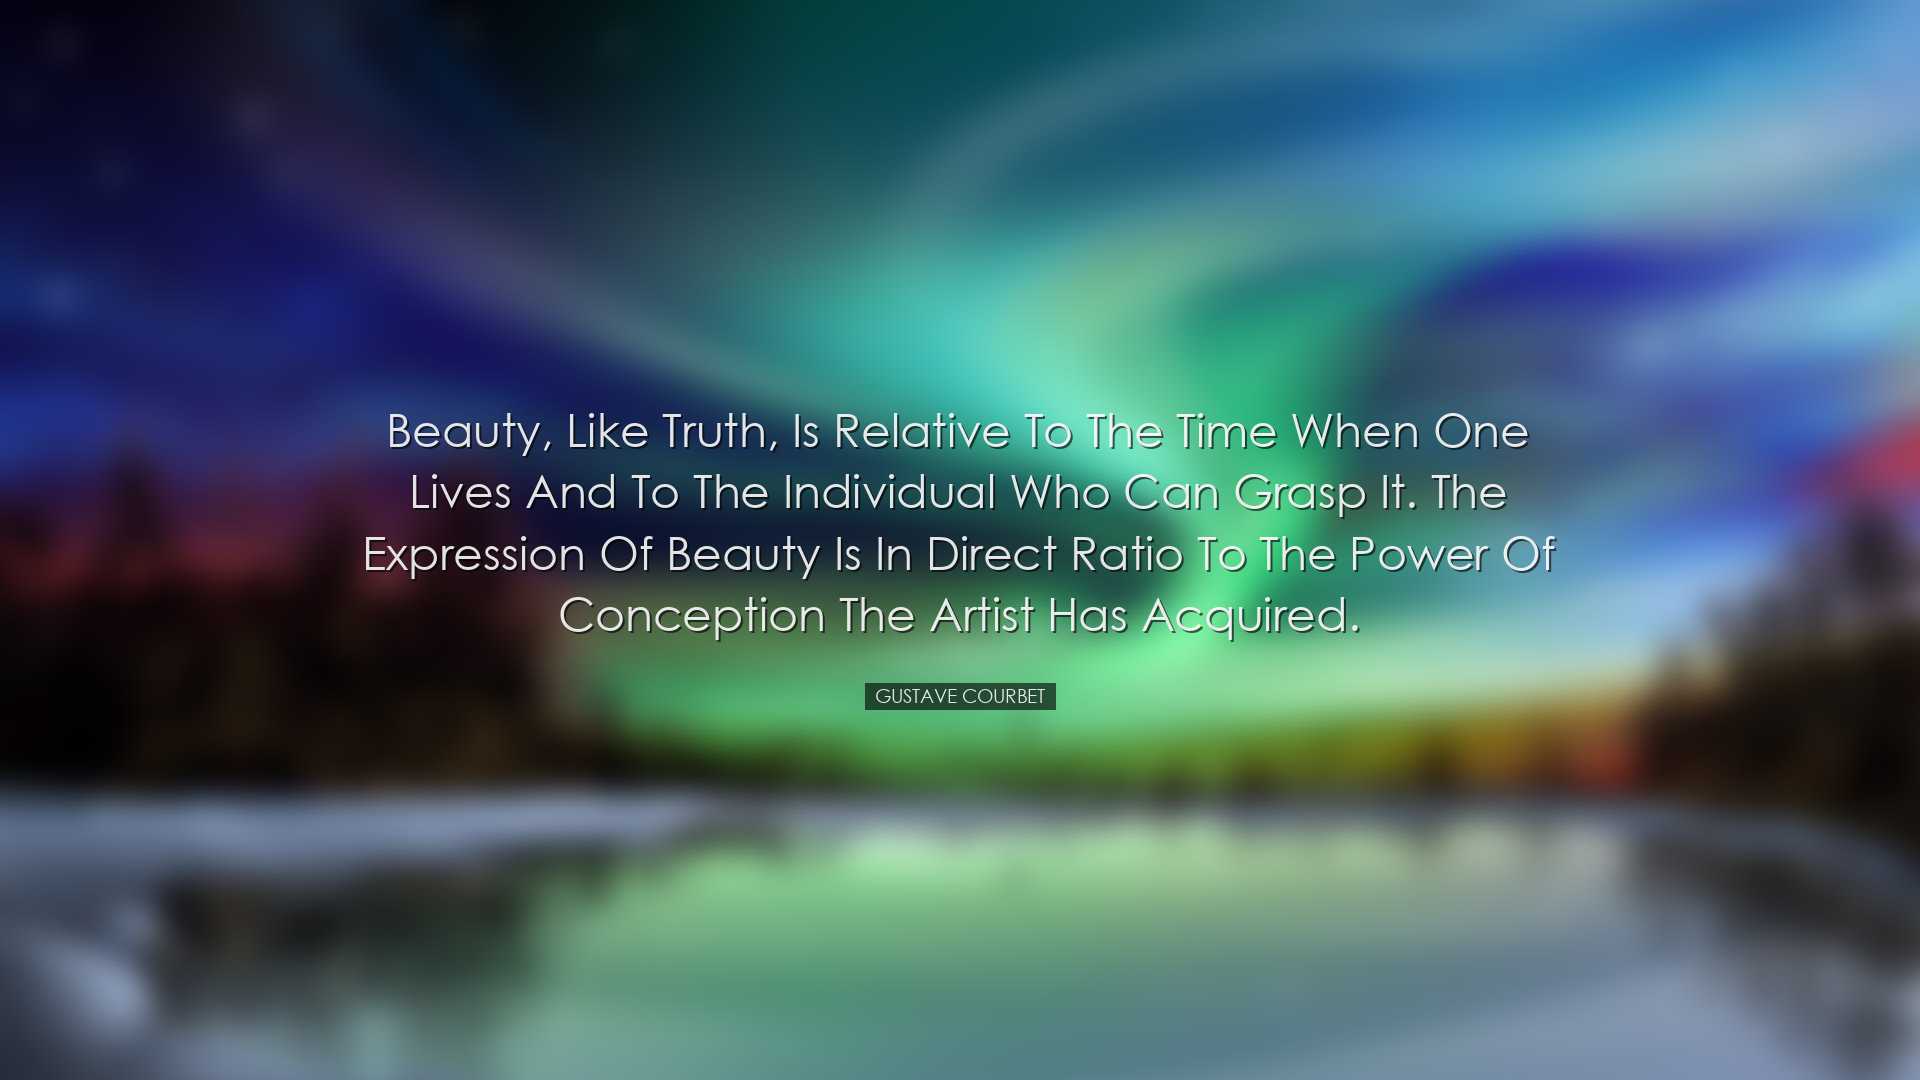 Beauty, like truth, is relative to the time when one lives and to